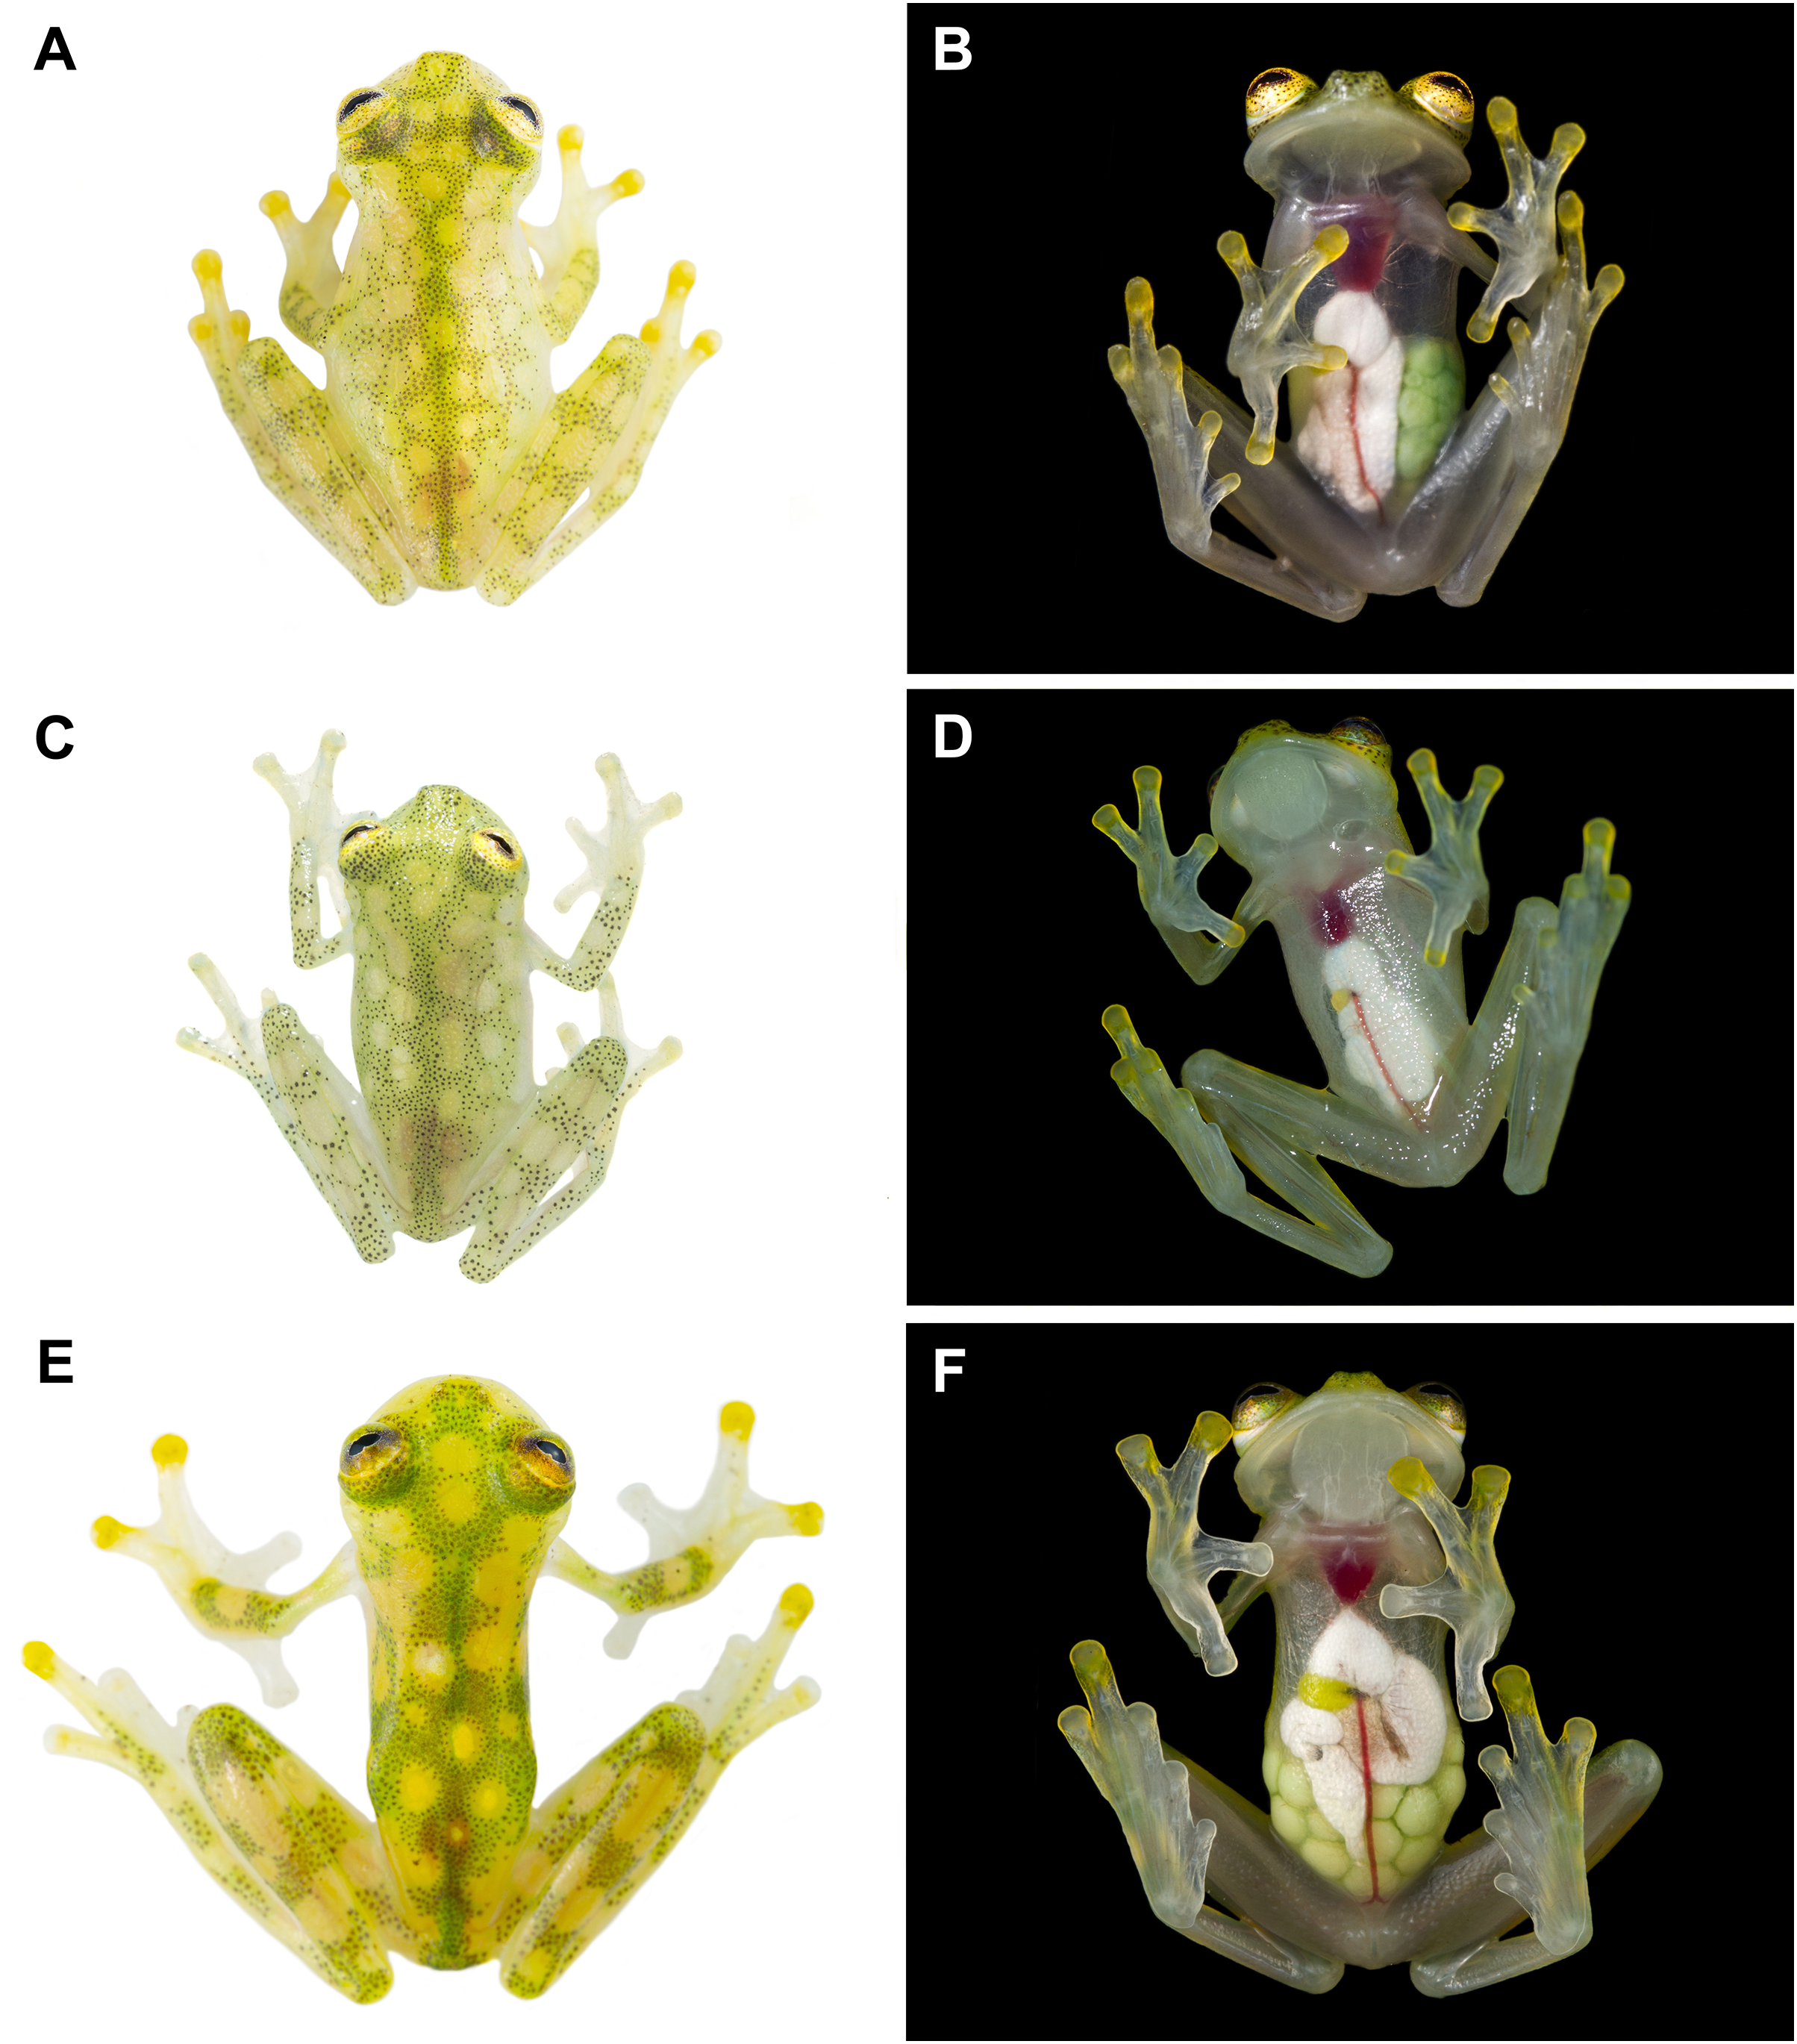 Two new glassfrogs (Centrolenidae: Hyalinobatrachium) from Ecuador, with  comments on the endangered biodiversity of the Andes [PeerJ]